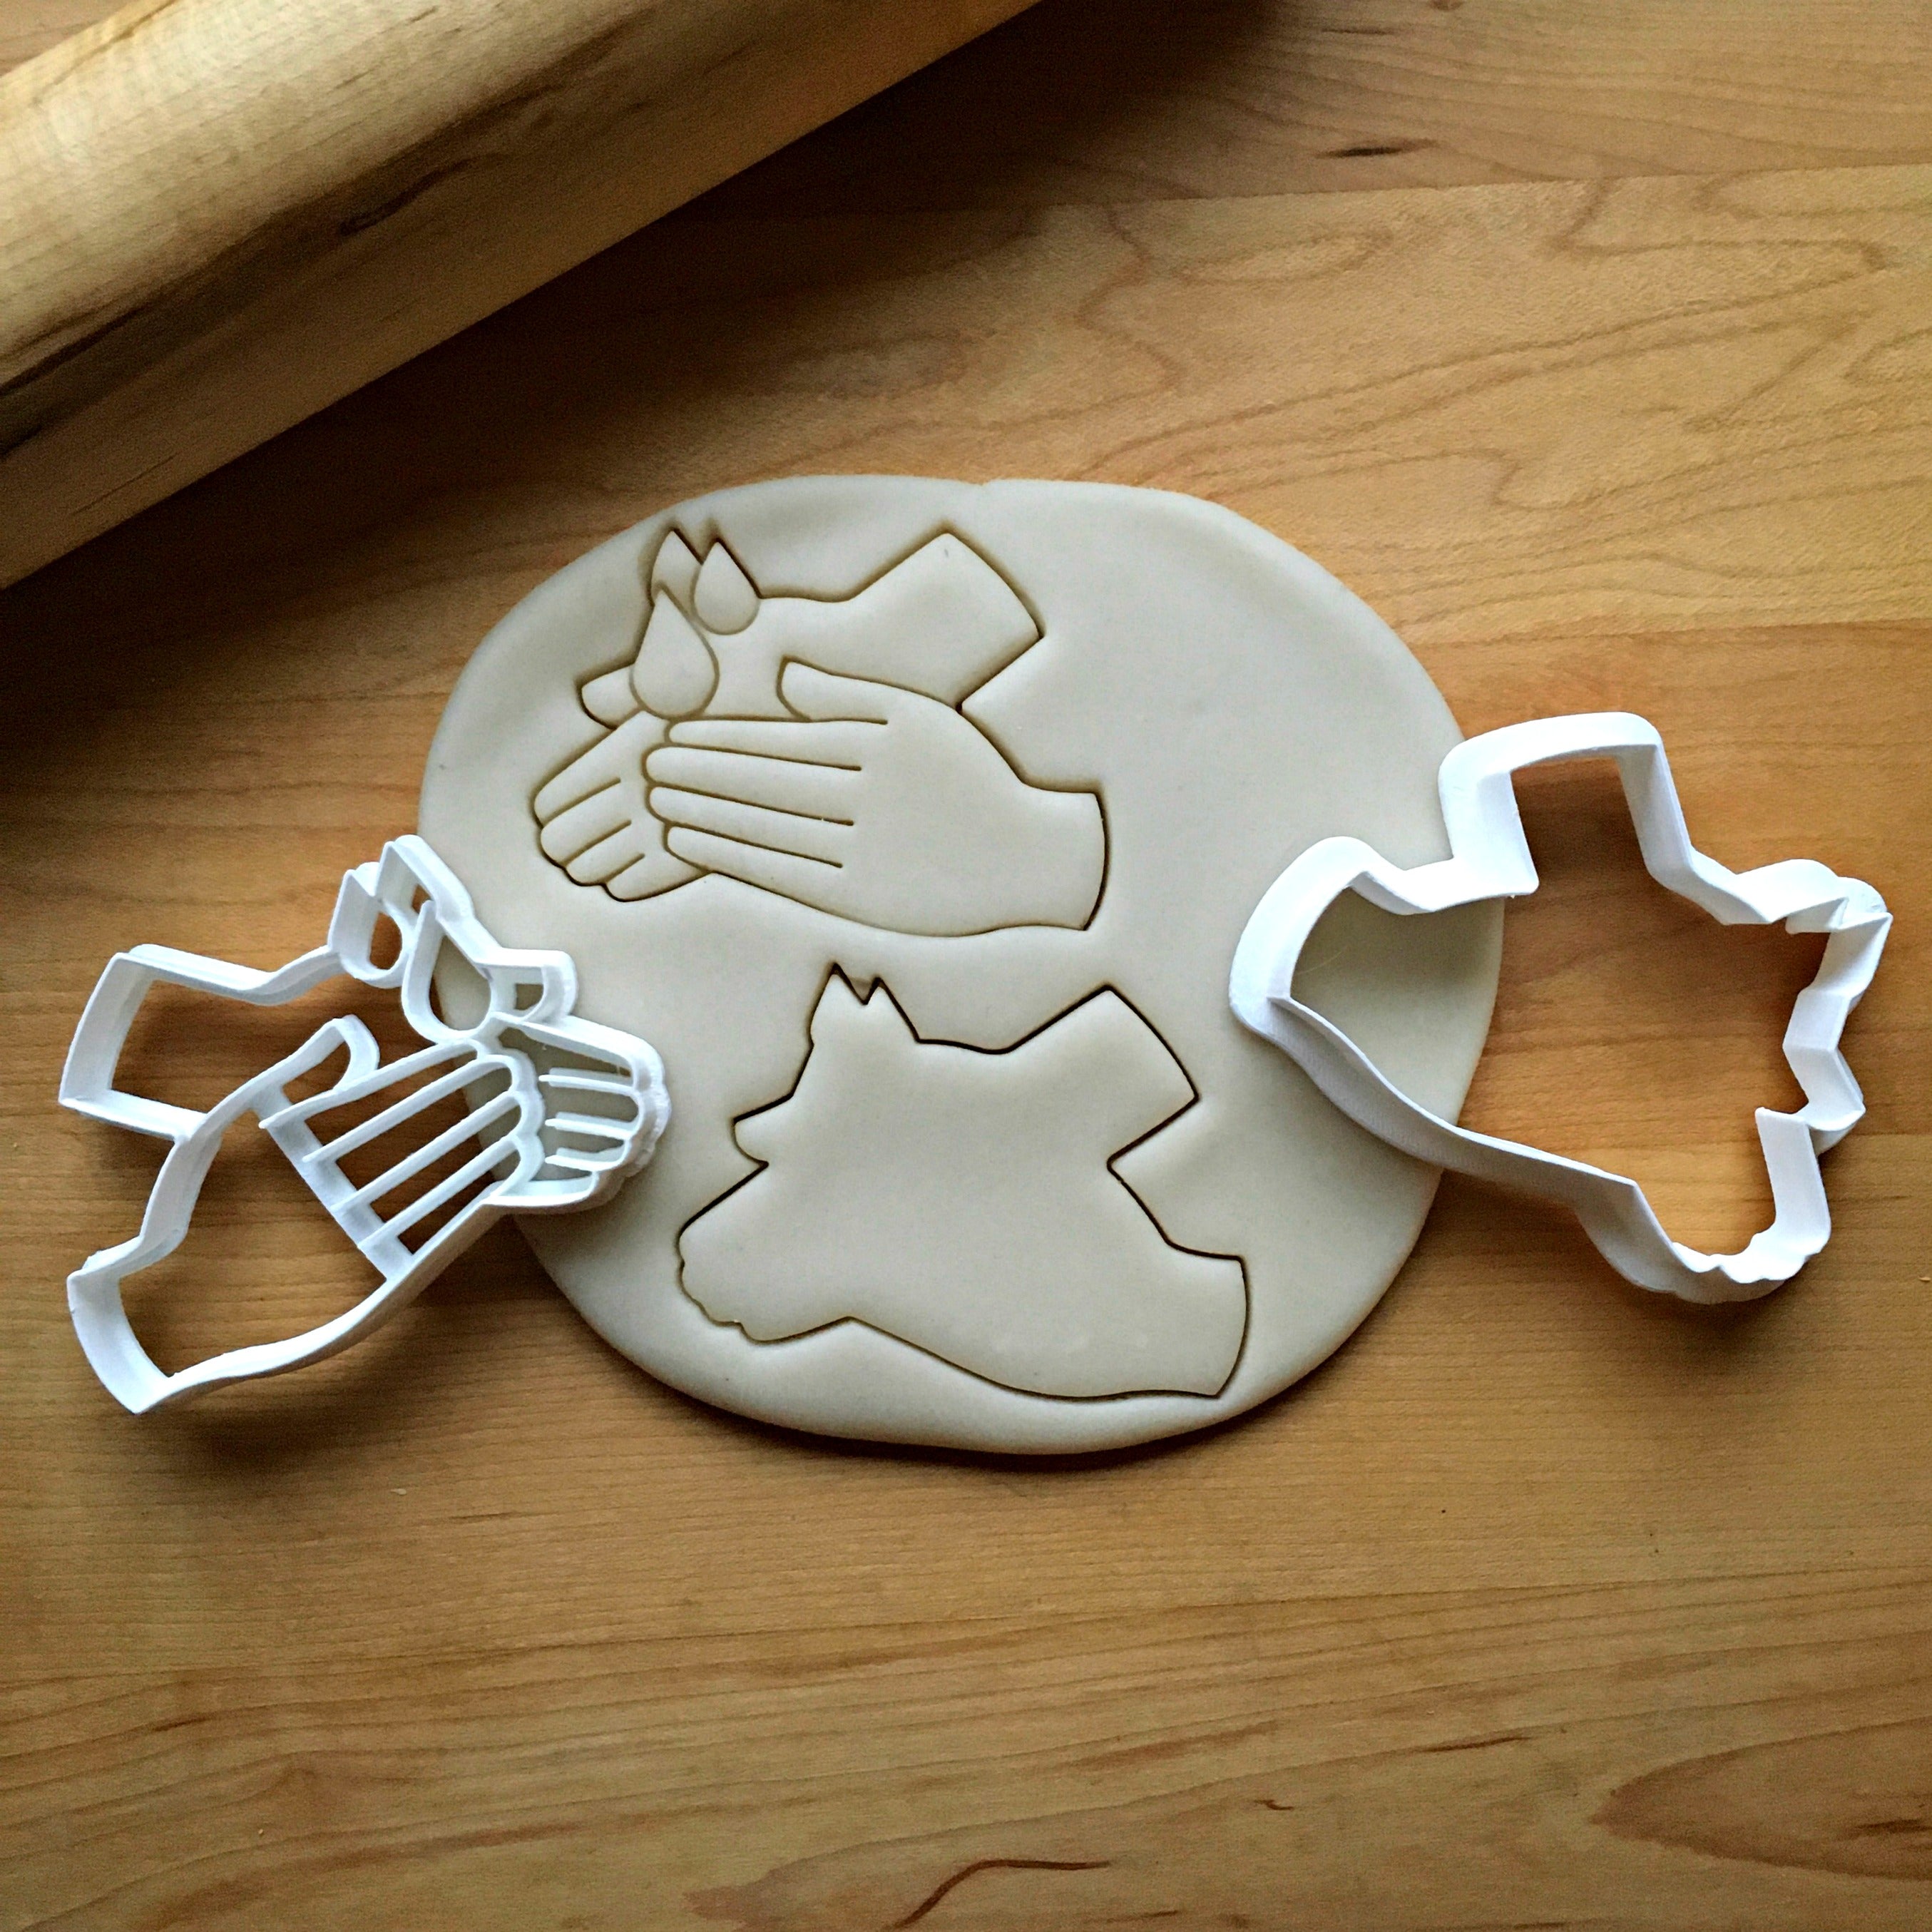 Set of 2 Hand Washing Cookie Cutters/Dishwasher Safe